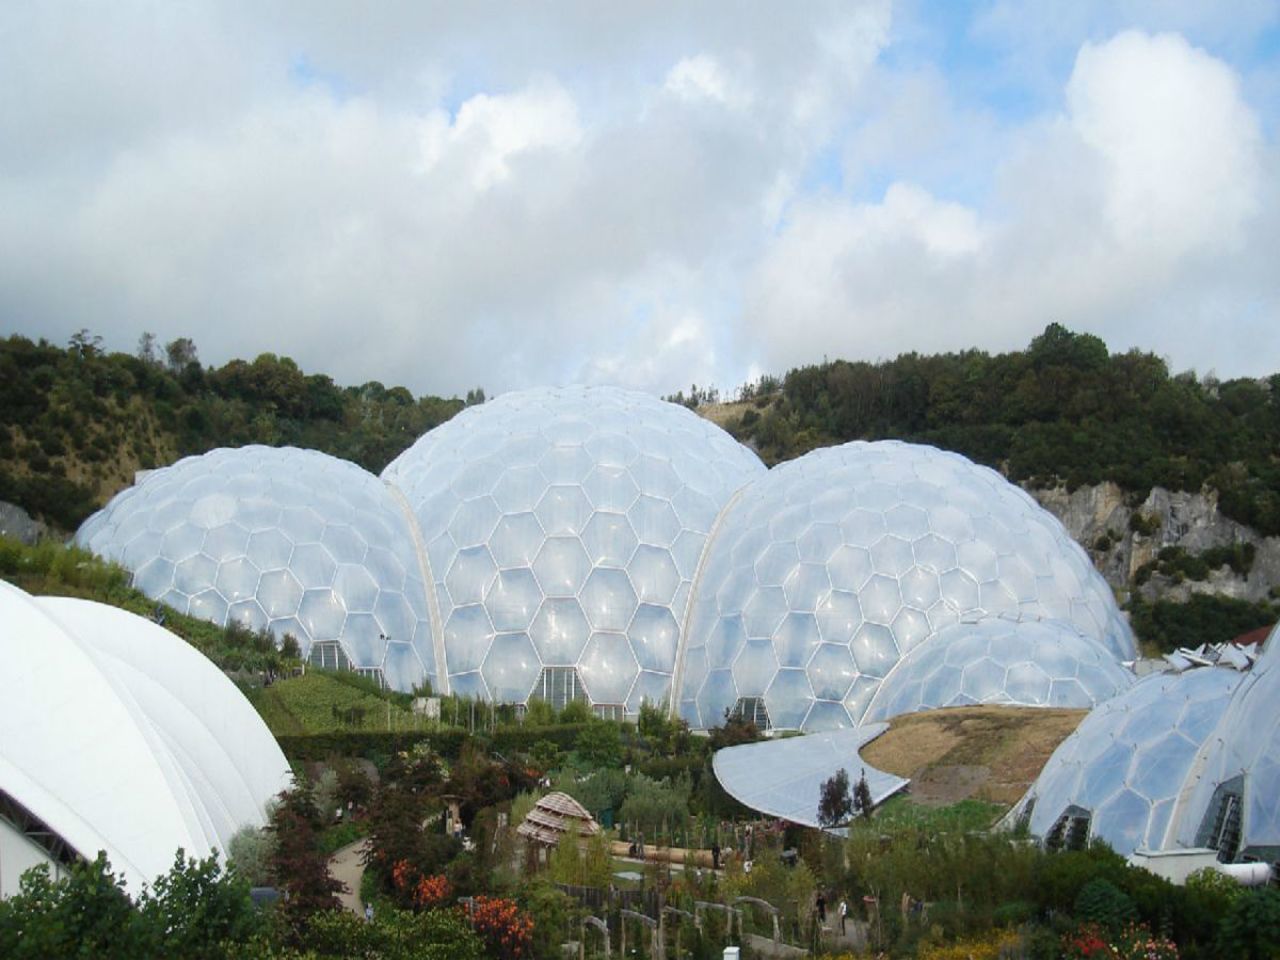 Taking nearly six years between concept and opening, the ambitious <a href="http://www.edenproject.com" target="_blank" target="_blank">Eden Project</a> opened to the public in March 2001. The attraction features two immense plastic and steel enclosures that emulate natural biomes and house thousands of plant species. <br /><br />In the last decade, the complex has hosted concerts, marathons and weddings. The addition of a sustainable education center, a giant "robot" made from scrap electronics and, more recently, a "rainforest lookout" aerial tower, have all contributed to Eden's popularity.  <br />(Image: Courtesy Lawrie Cate)